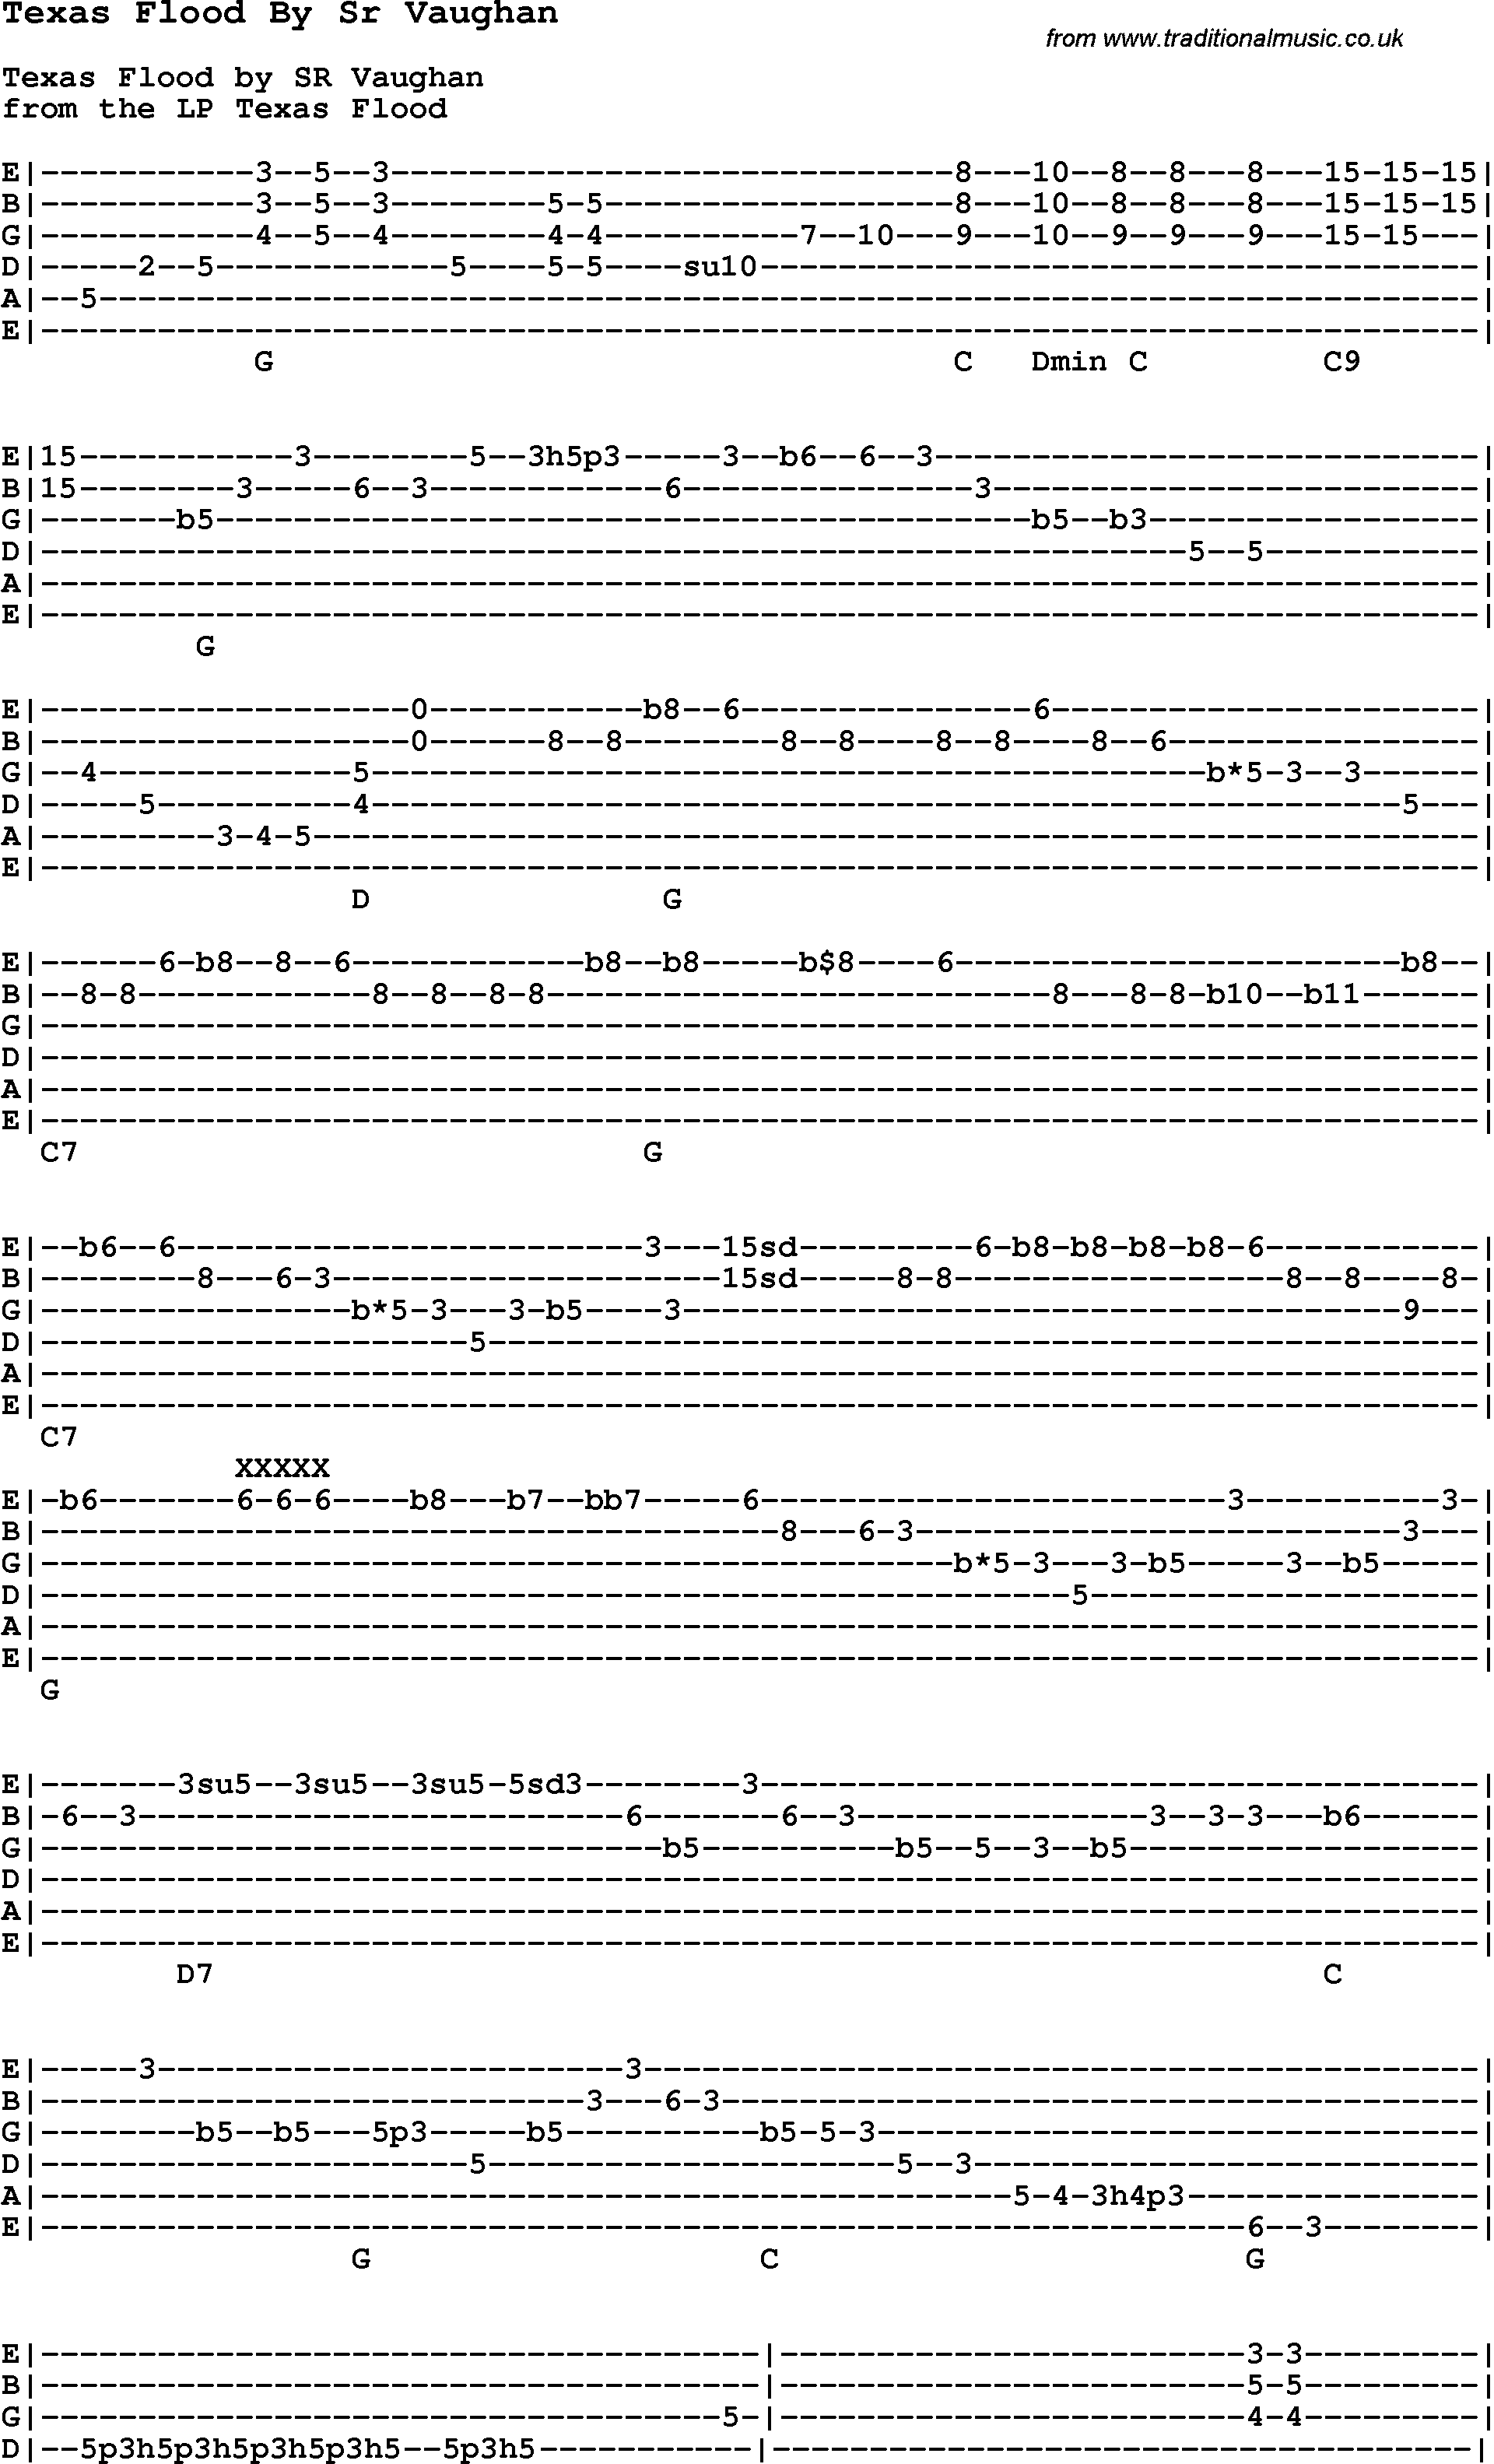 Blues Guitar Song, lyrics, chords, tablature, playing hints for Texas Flood By Sr Vaughan